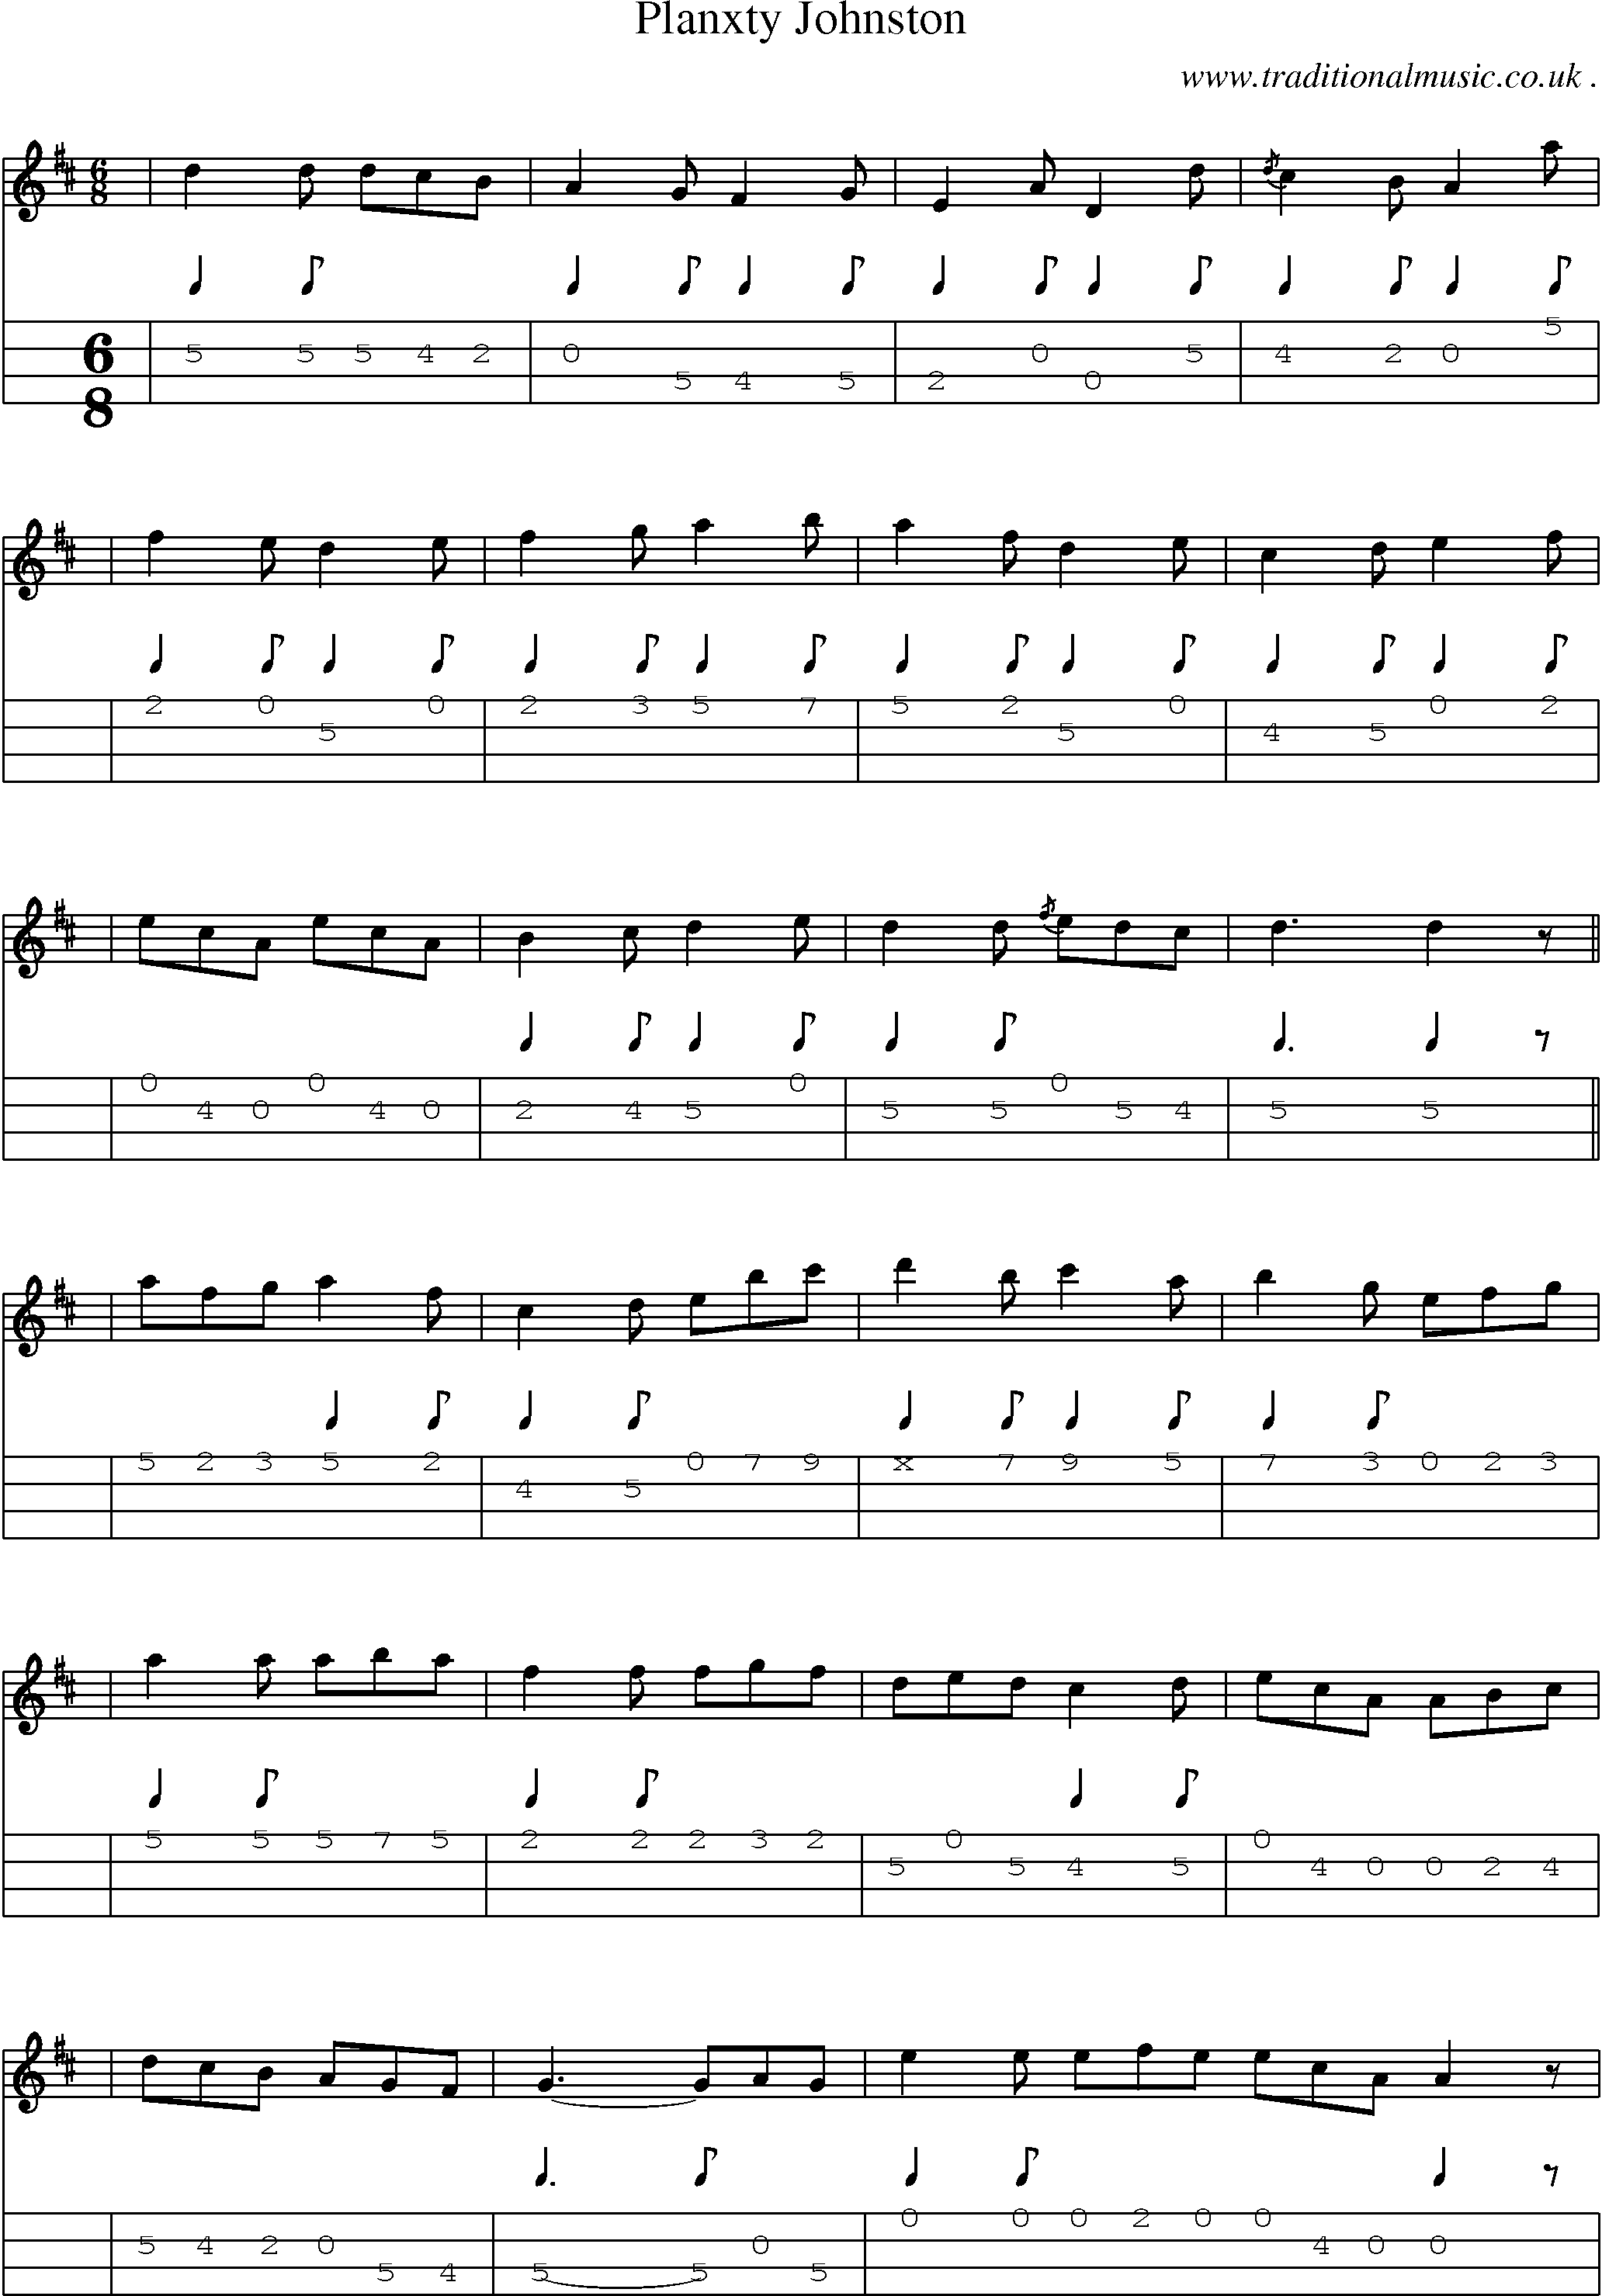 Sheet-music  score, Chords and Mandolin Tabs for Planxty Johnston